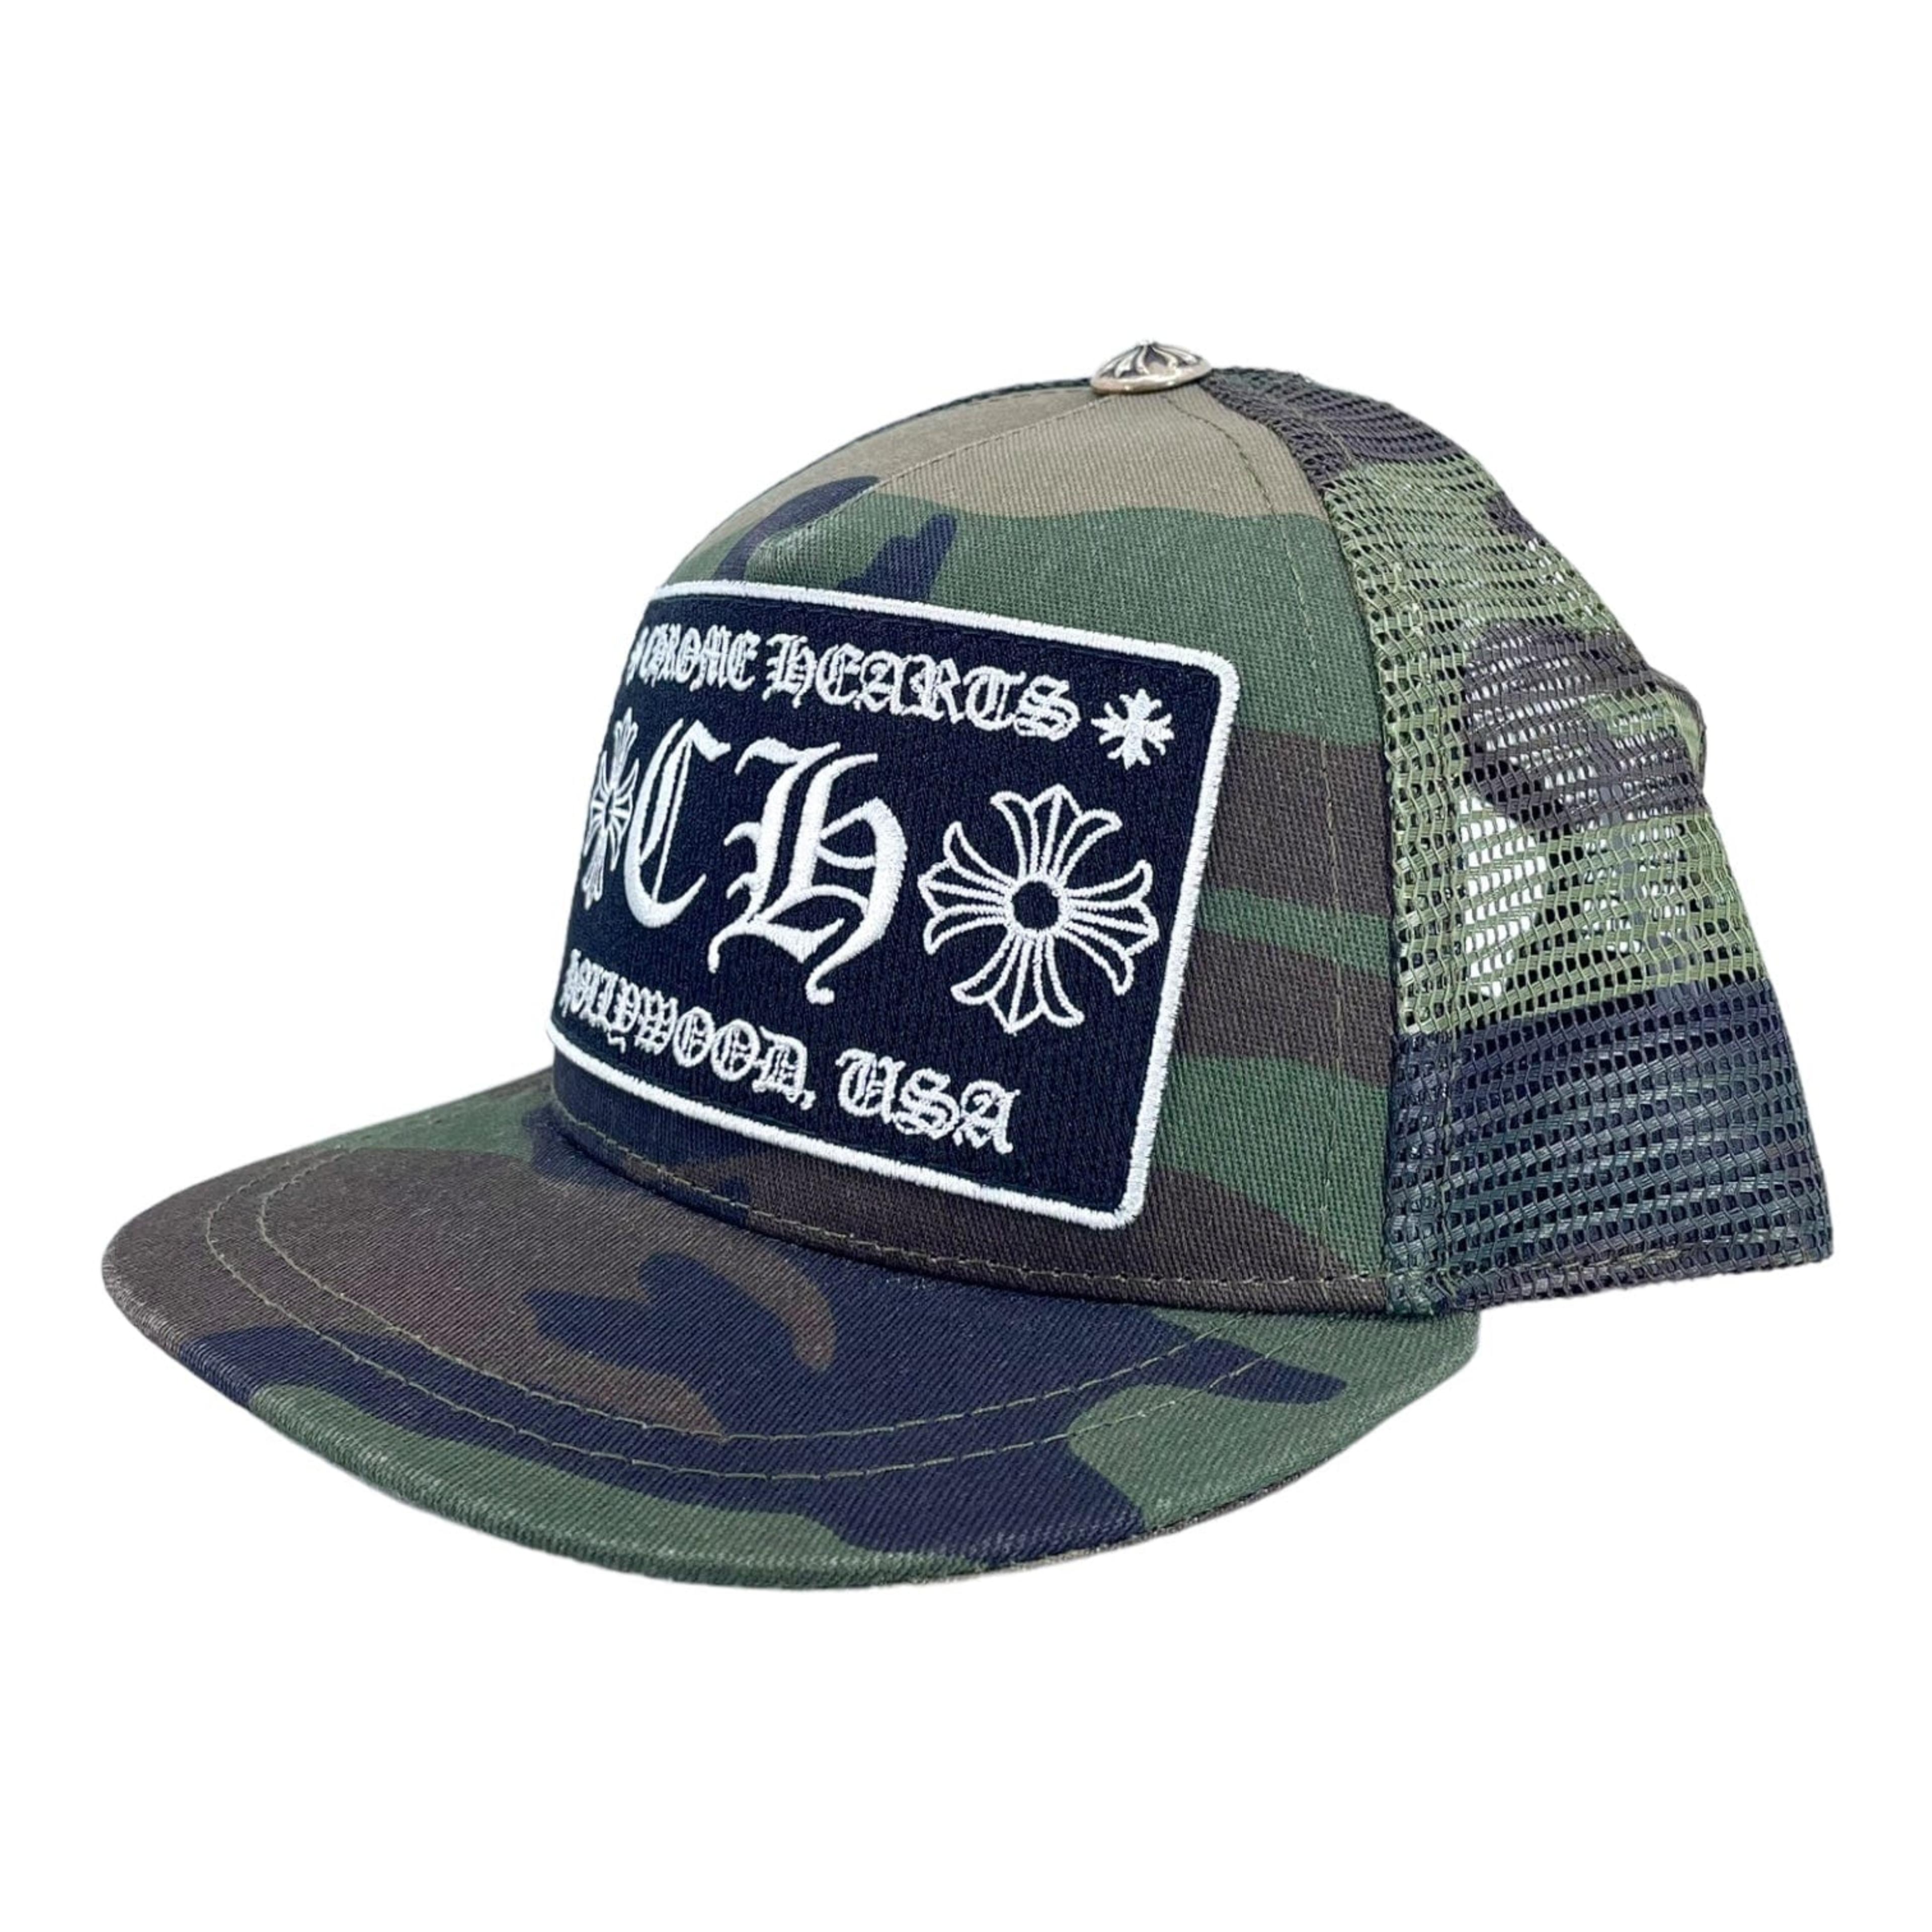 Alternate View 4 of Chrome Hearts CH Hollywood Trucker Hat Camo